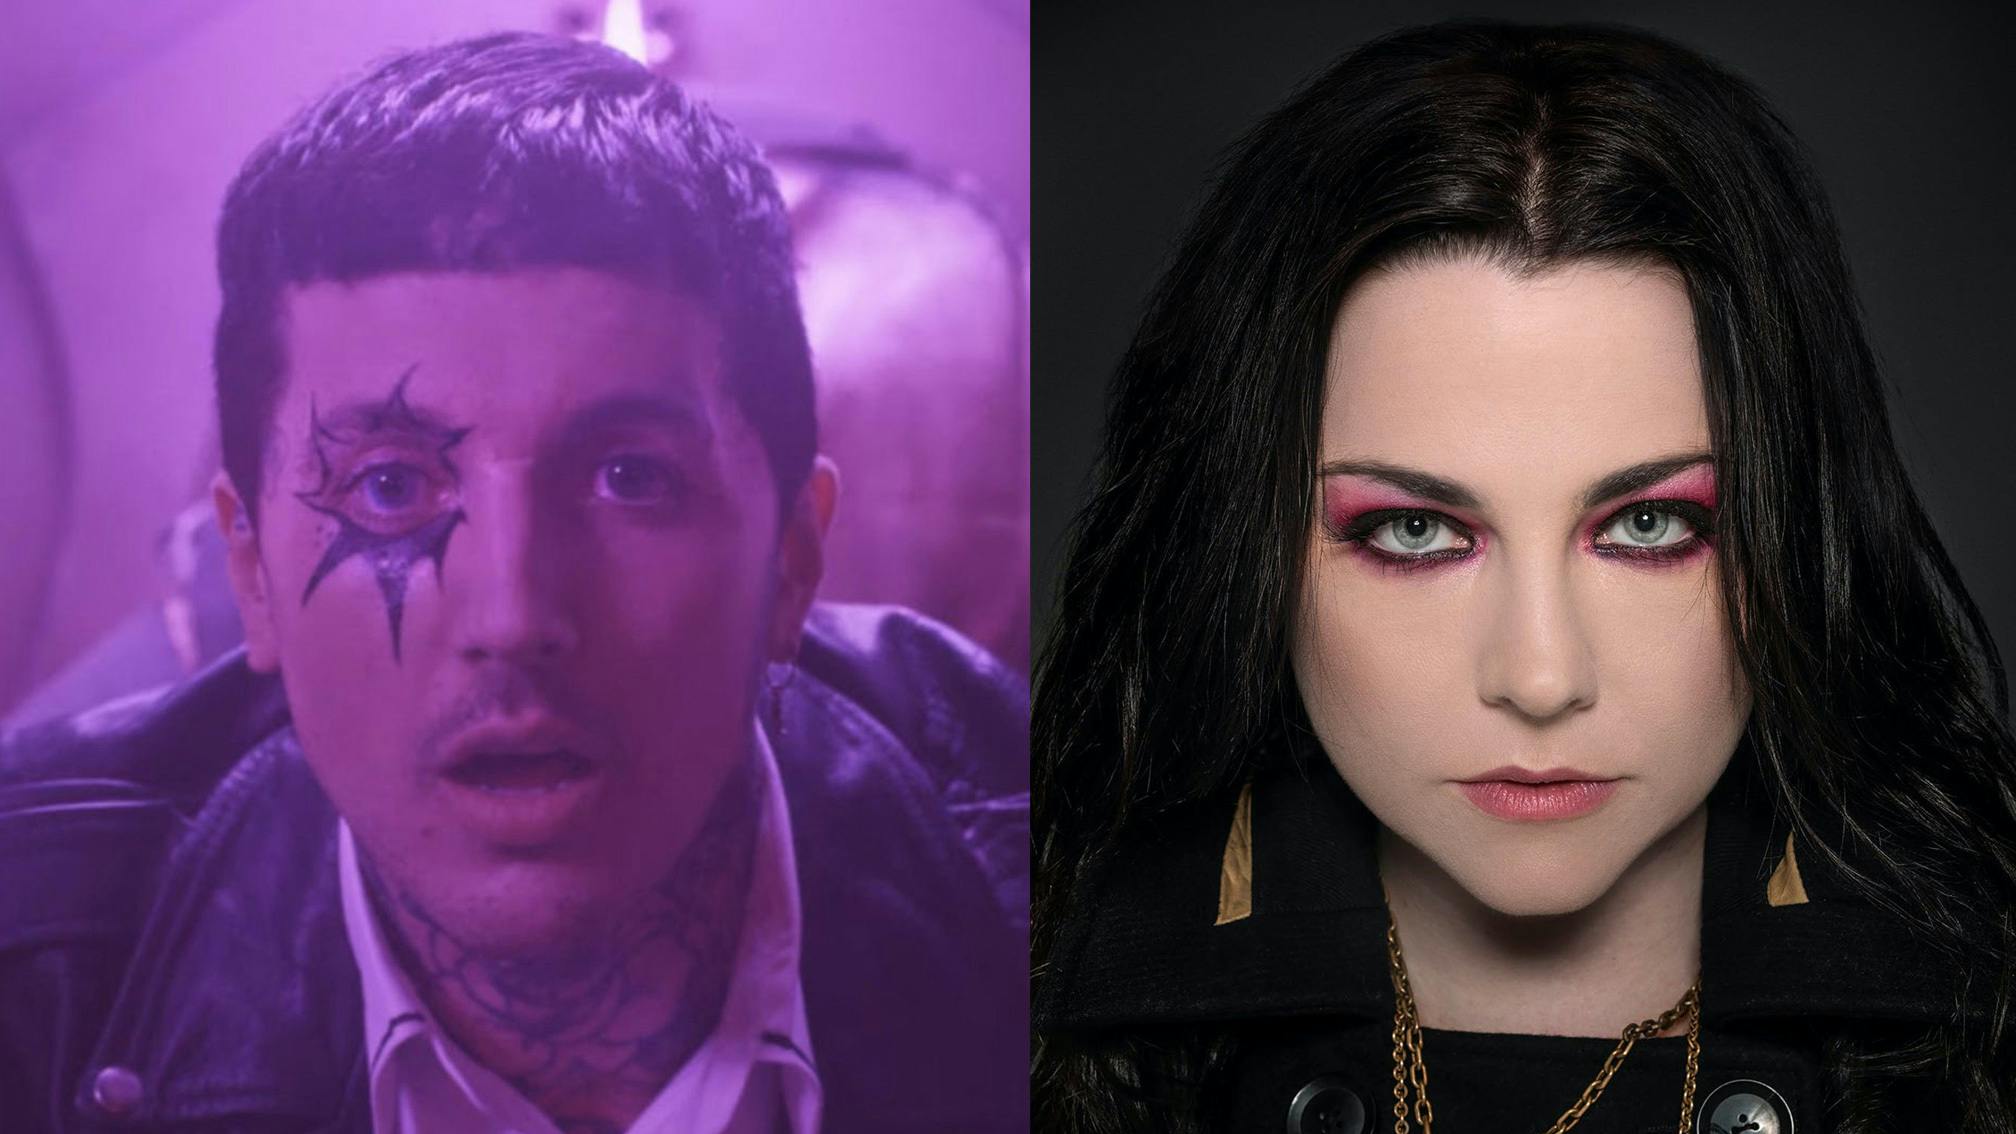 Listen to Evanescence's Amy Lee interview Bring Me The Horizon's Oli Sykes